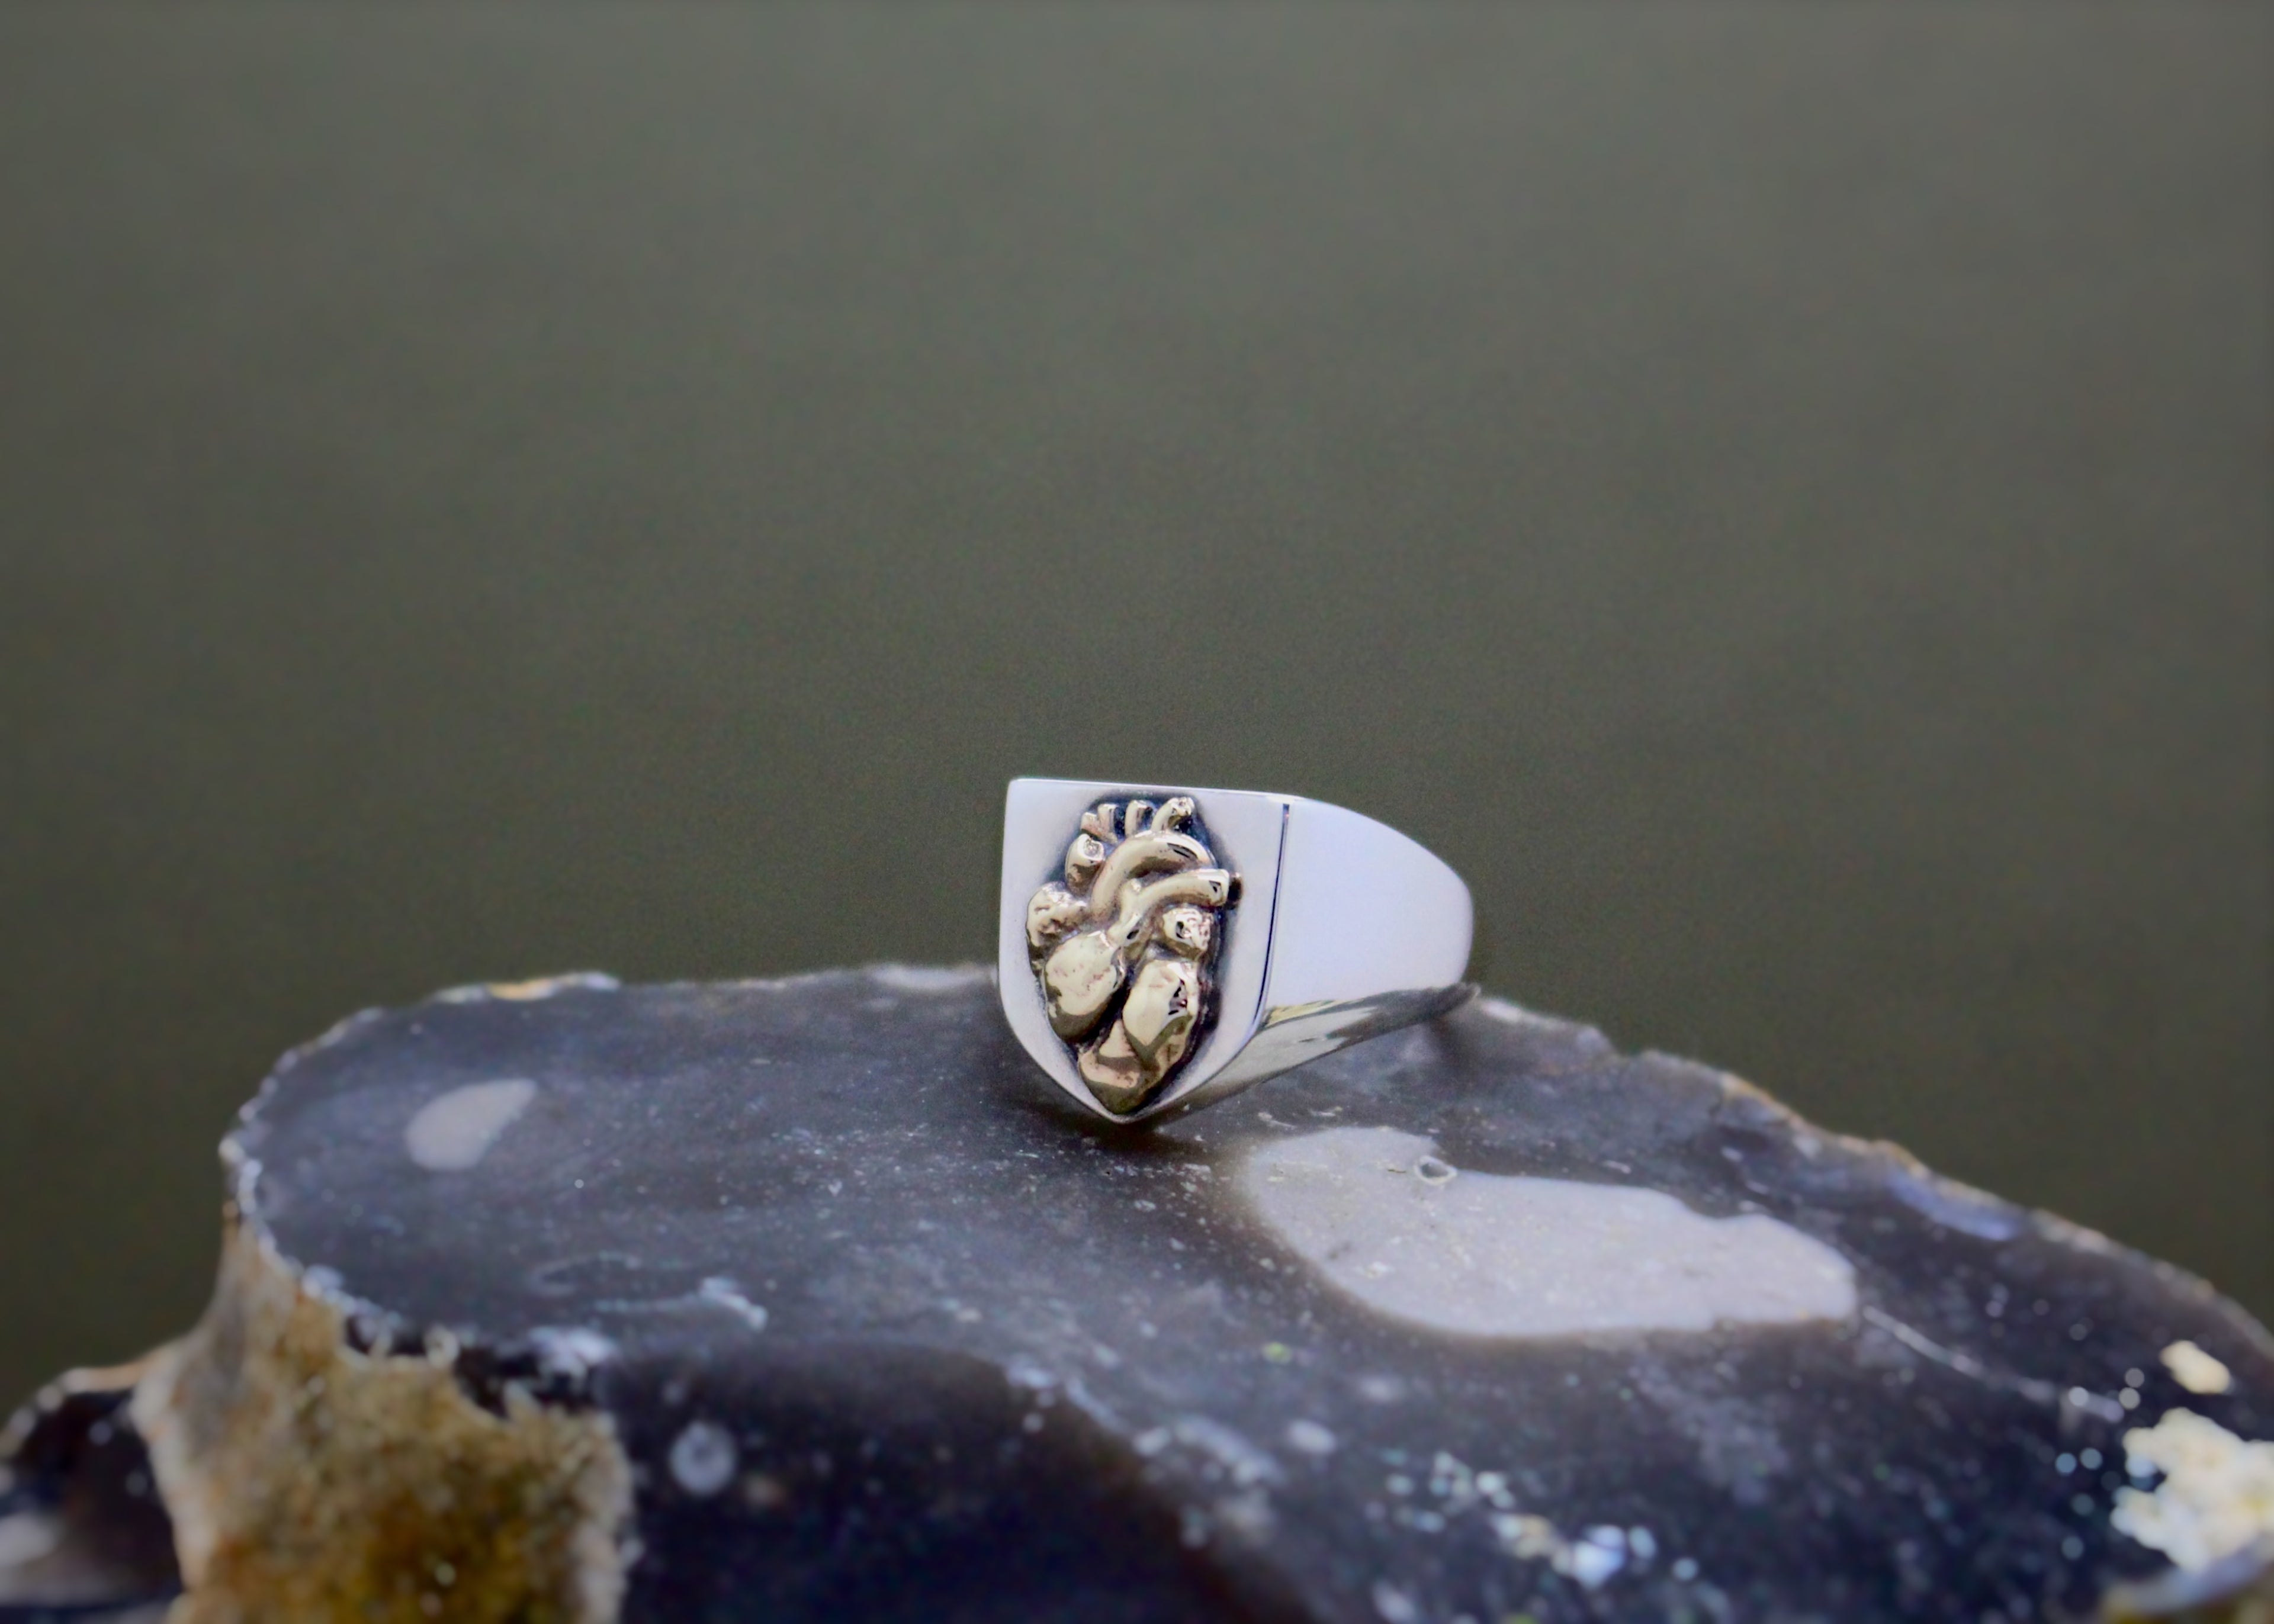 Silver shield wedding signet ring with yellow gold anatomical heart. Customised with Roman numeral engraving inside the band